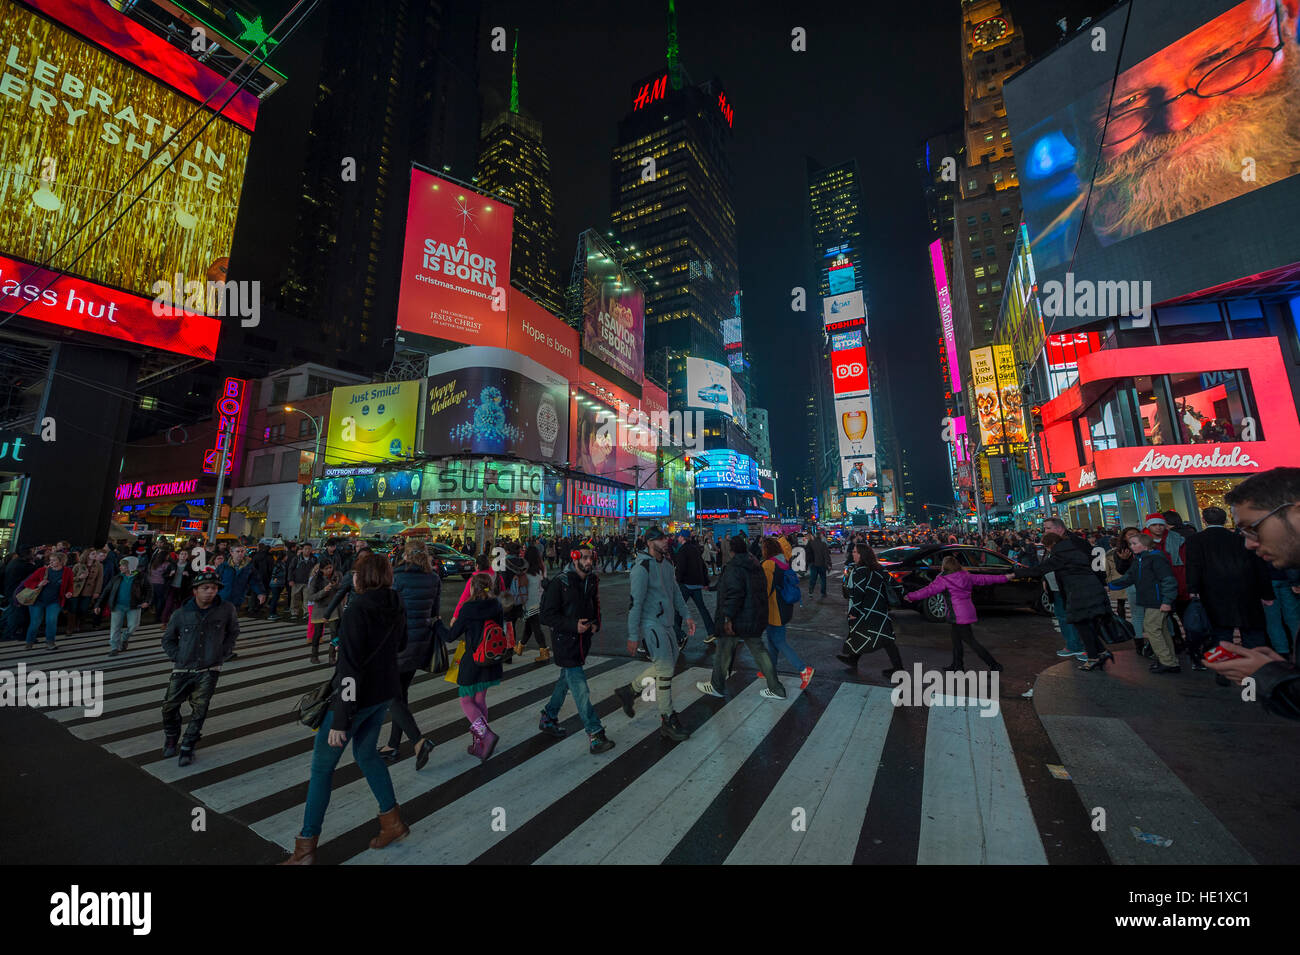 NEW YORK CITY - DECEMBER 22, 2015: Crowds gather under the bright lights of Times Square in the build-up to New Year's Eve. Stock Photo